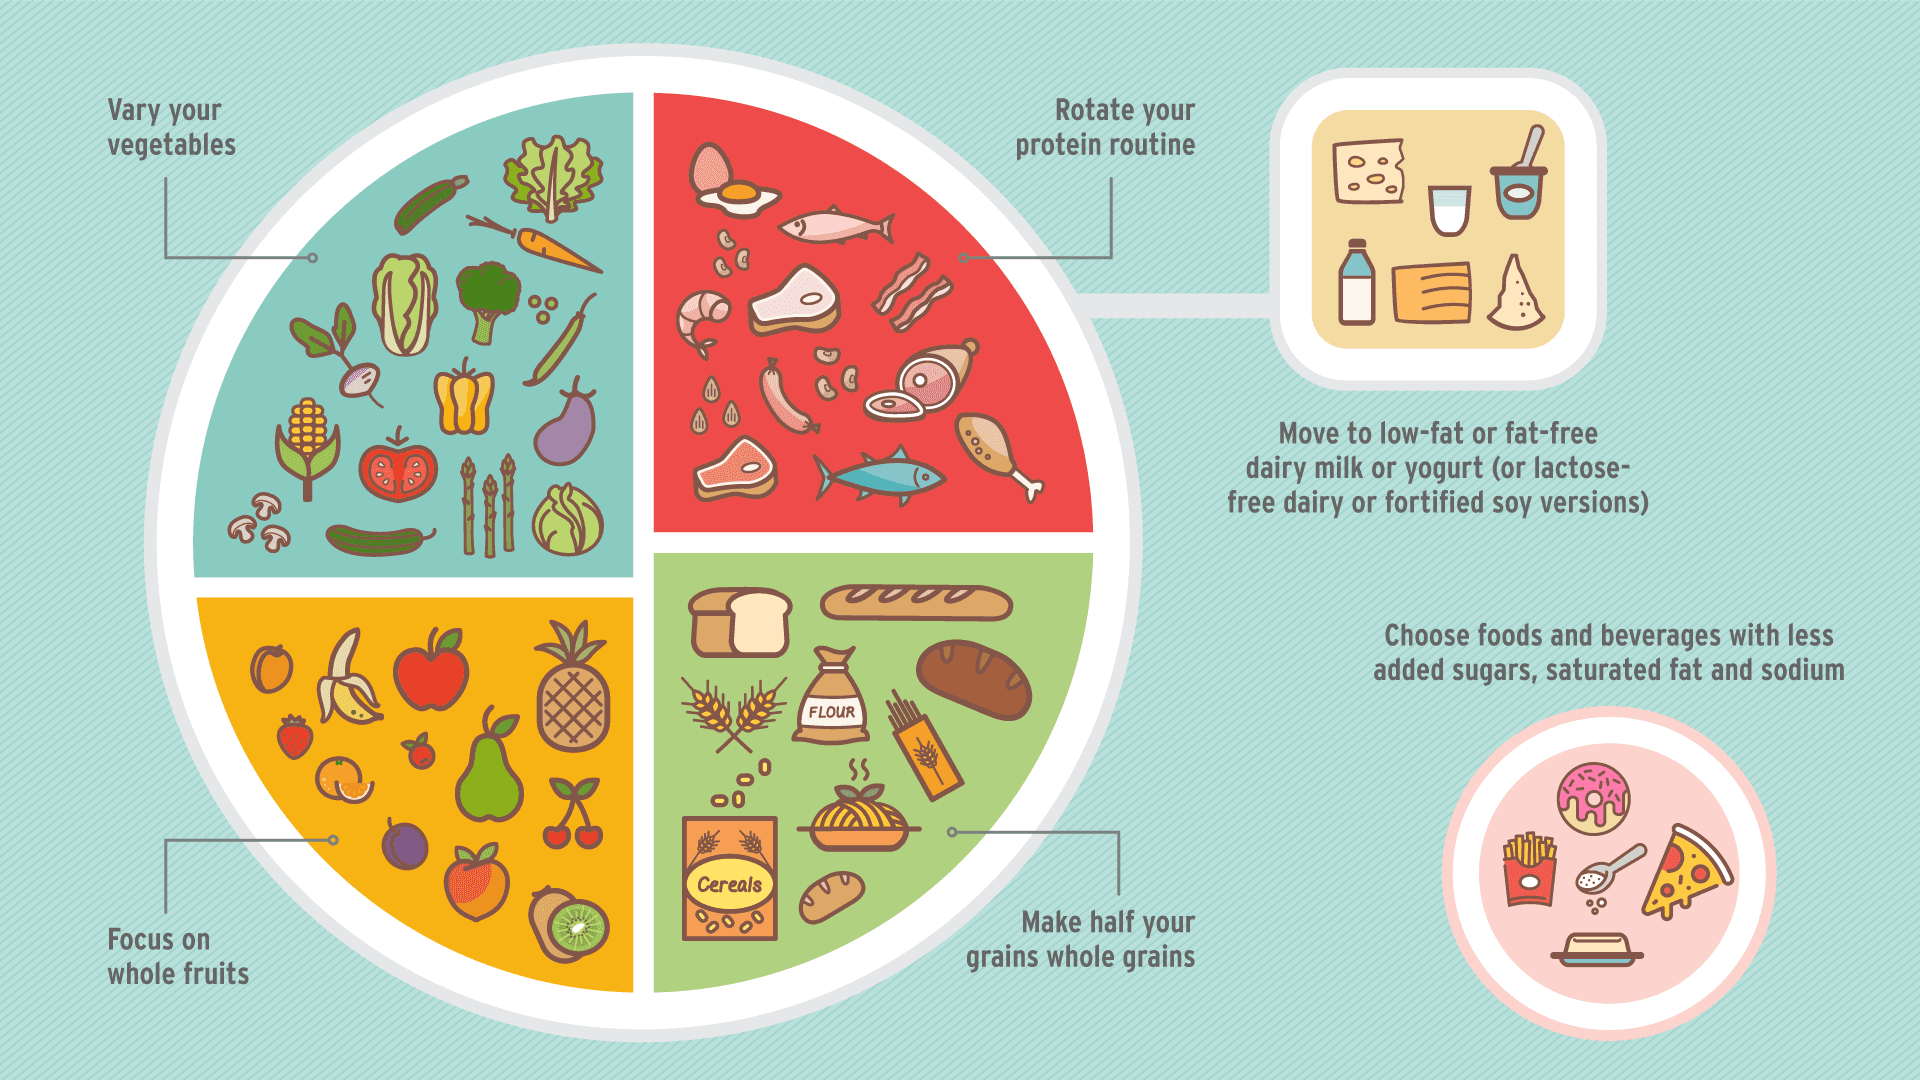 Plate illustration: vary your vegetables, focus on whole fruits, make half your grains whole grains, rotate your protein routine, move to low-fat or fat-free dairy milk or yogurt (or lactose-free dairy or fortified soy versions), choose foods and beverages with less added sugars, saturated fat and sodium